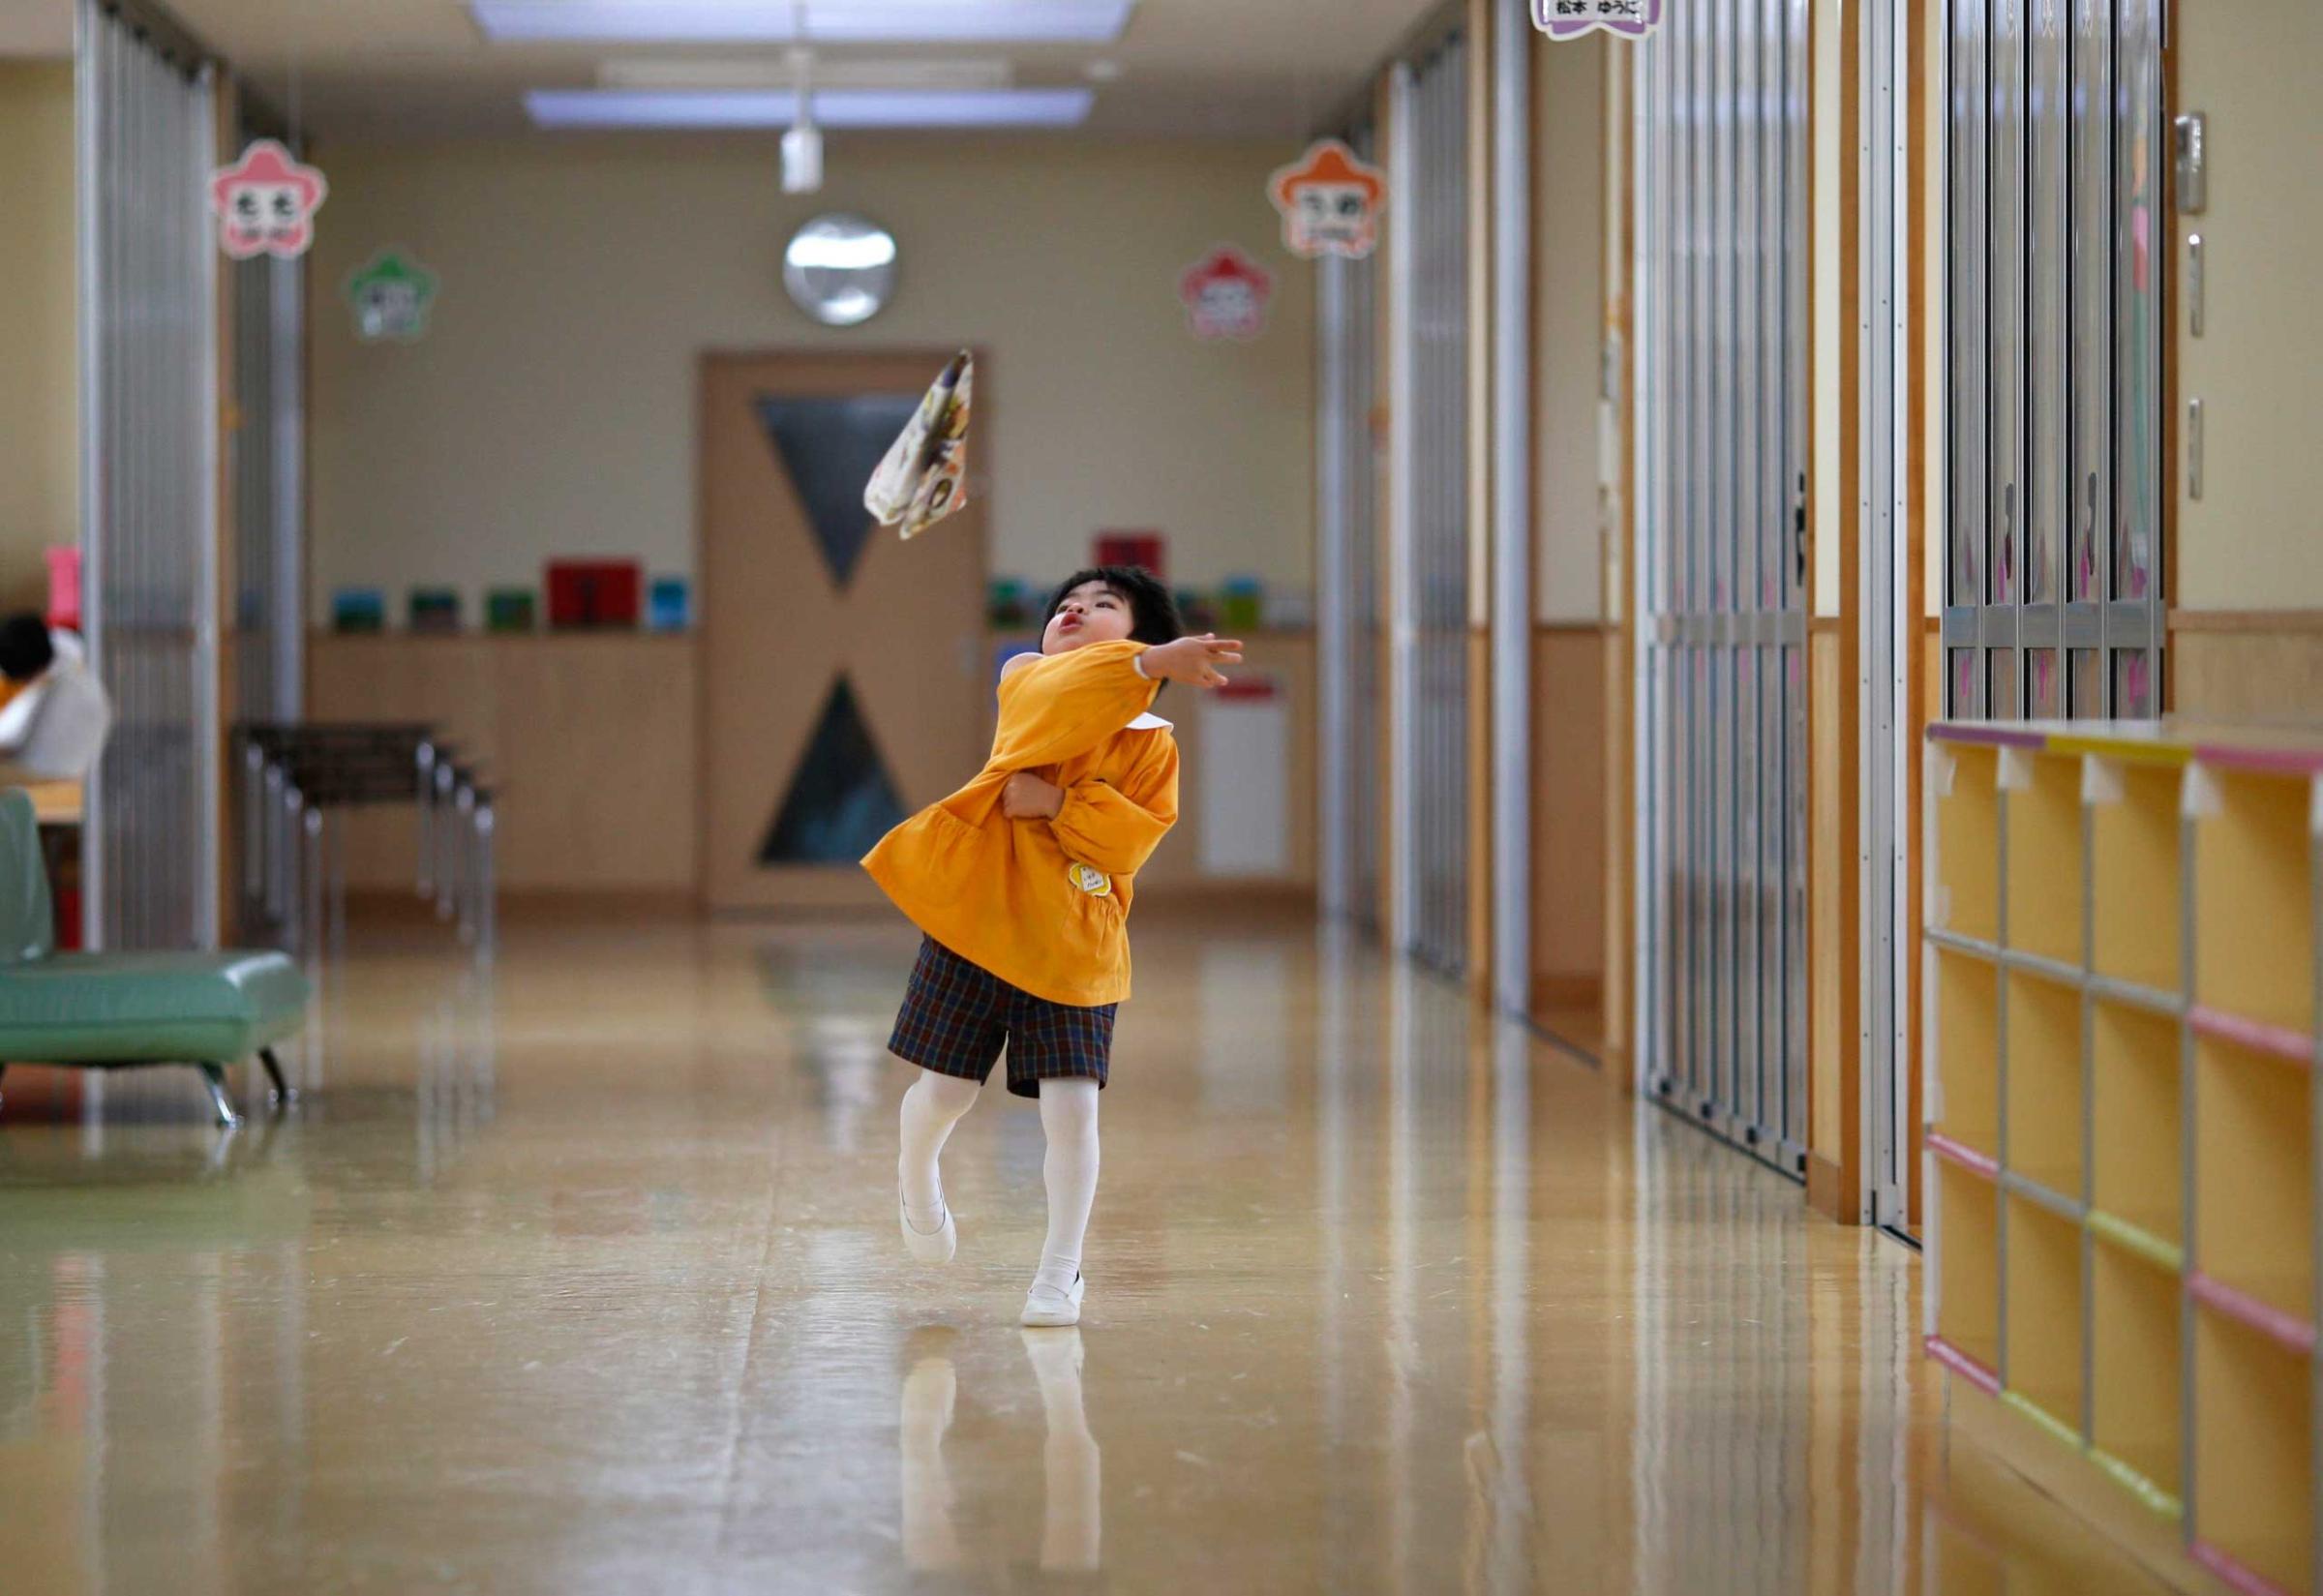 A boy plays with a paper plane at the corridor of the Emporium kindergarten in Koriyama